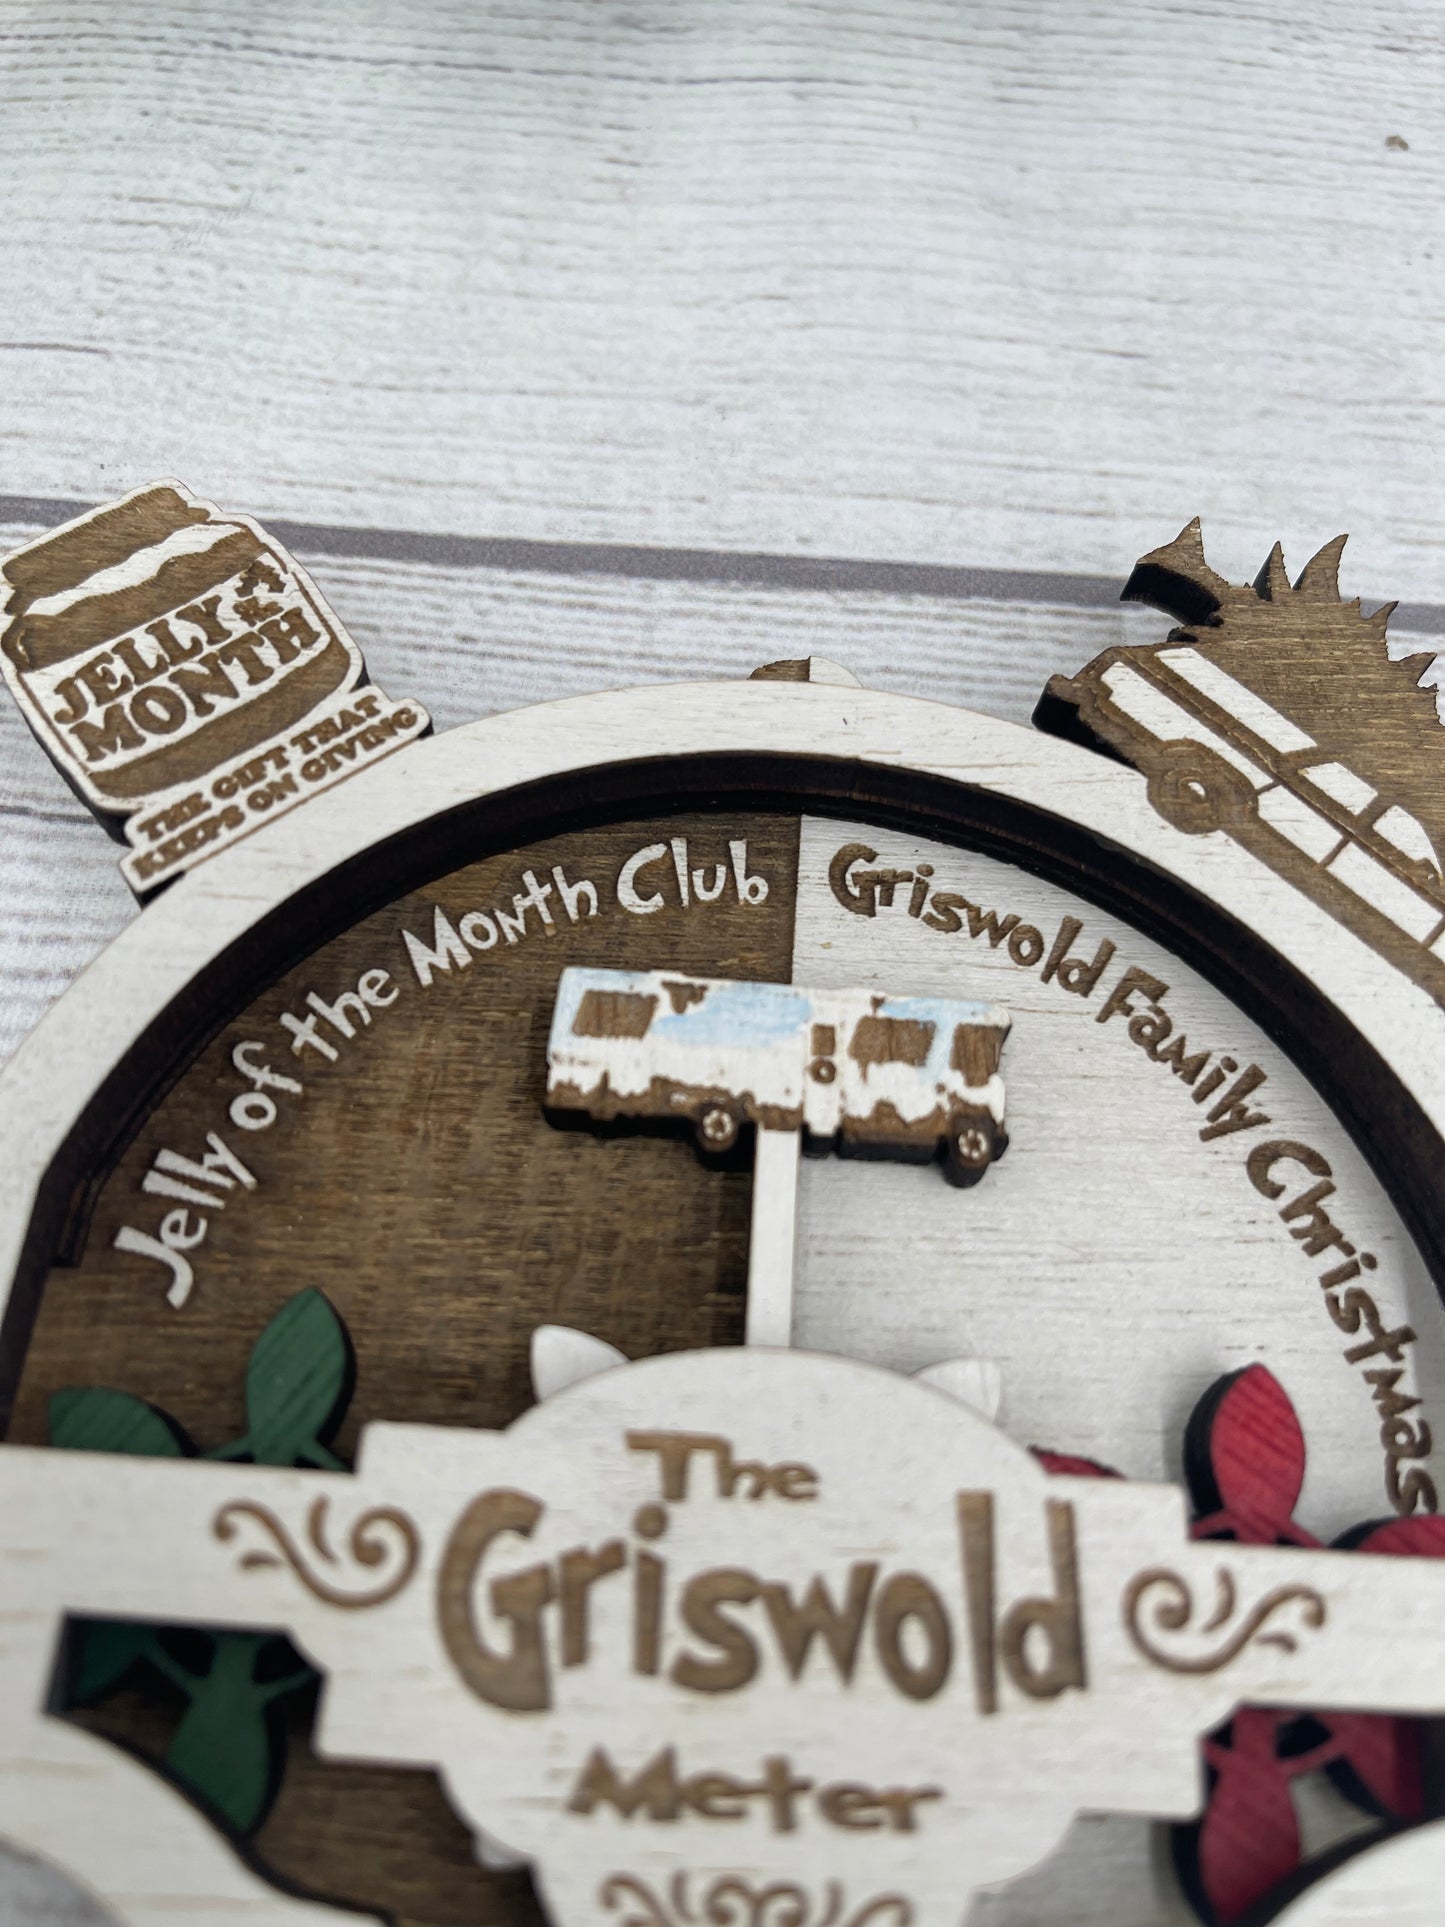 The Griswold Meter Christmas Vacation Inspired Ornament - Jelly of the Month or Griswold Family Christmas - Moveable Gears